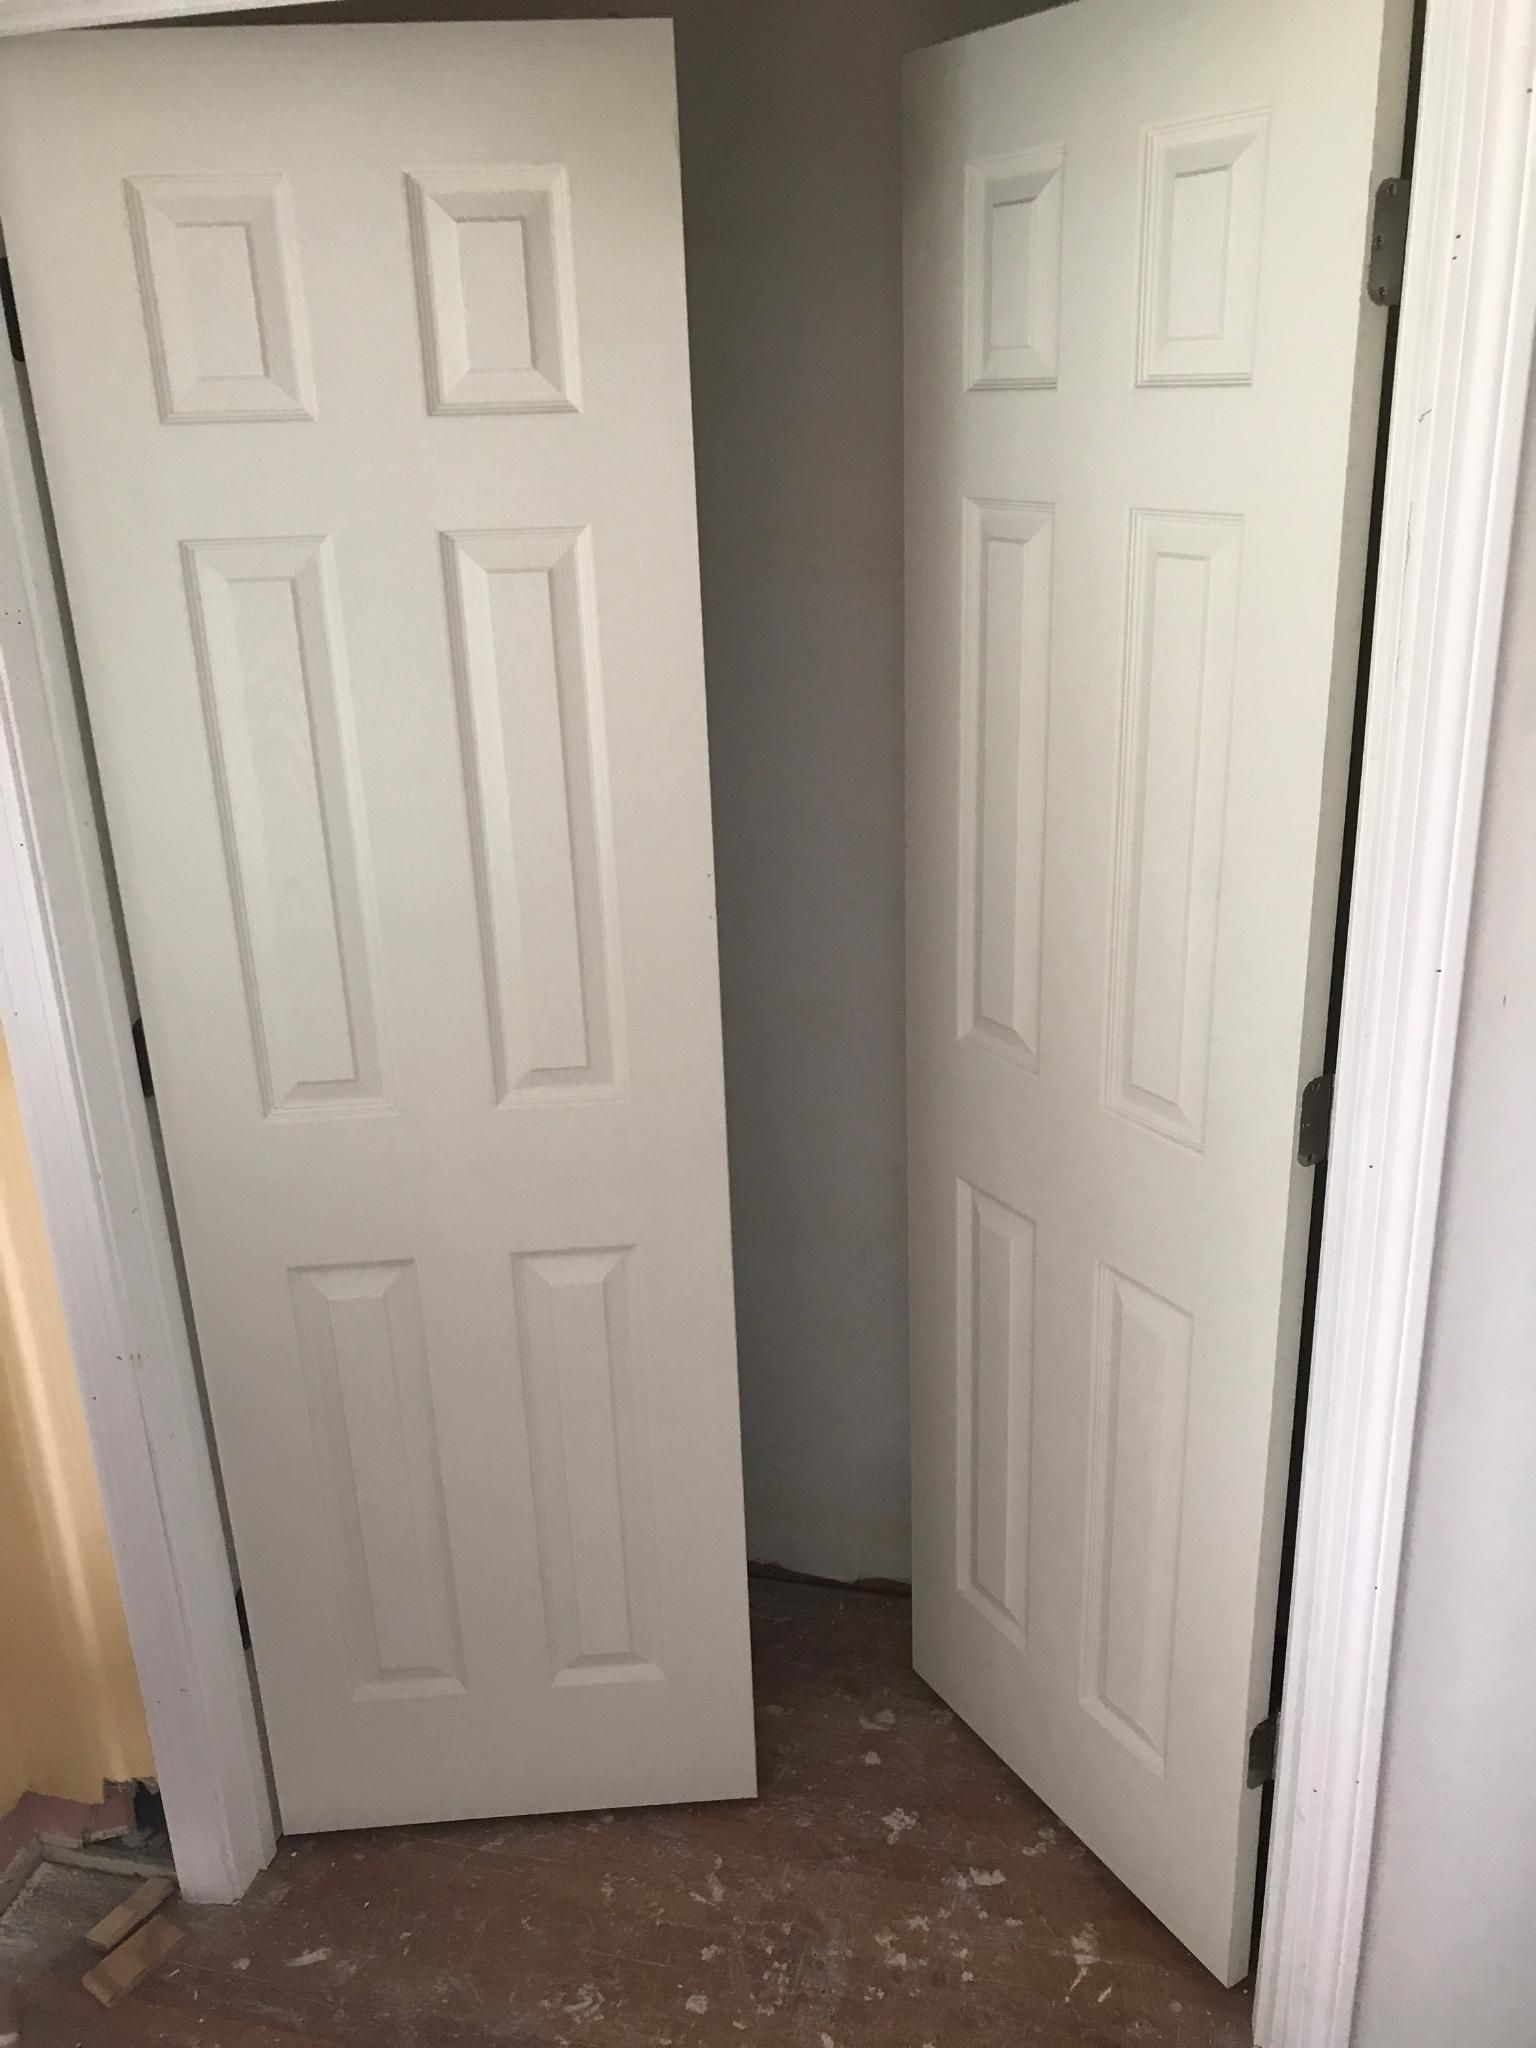 My friends carpenter saw nothing wrong with how he installed the closet doors.